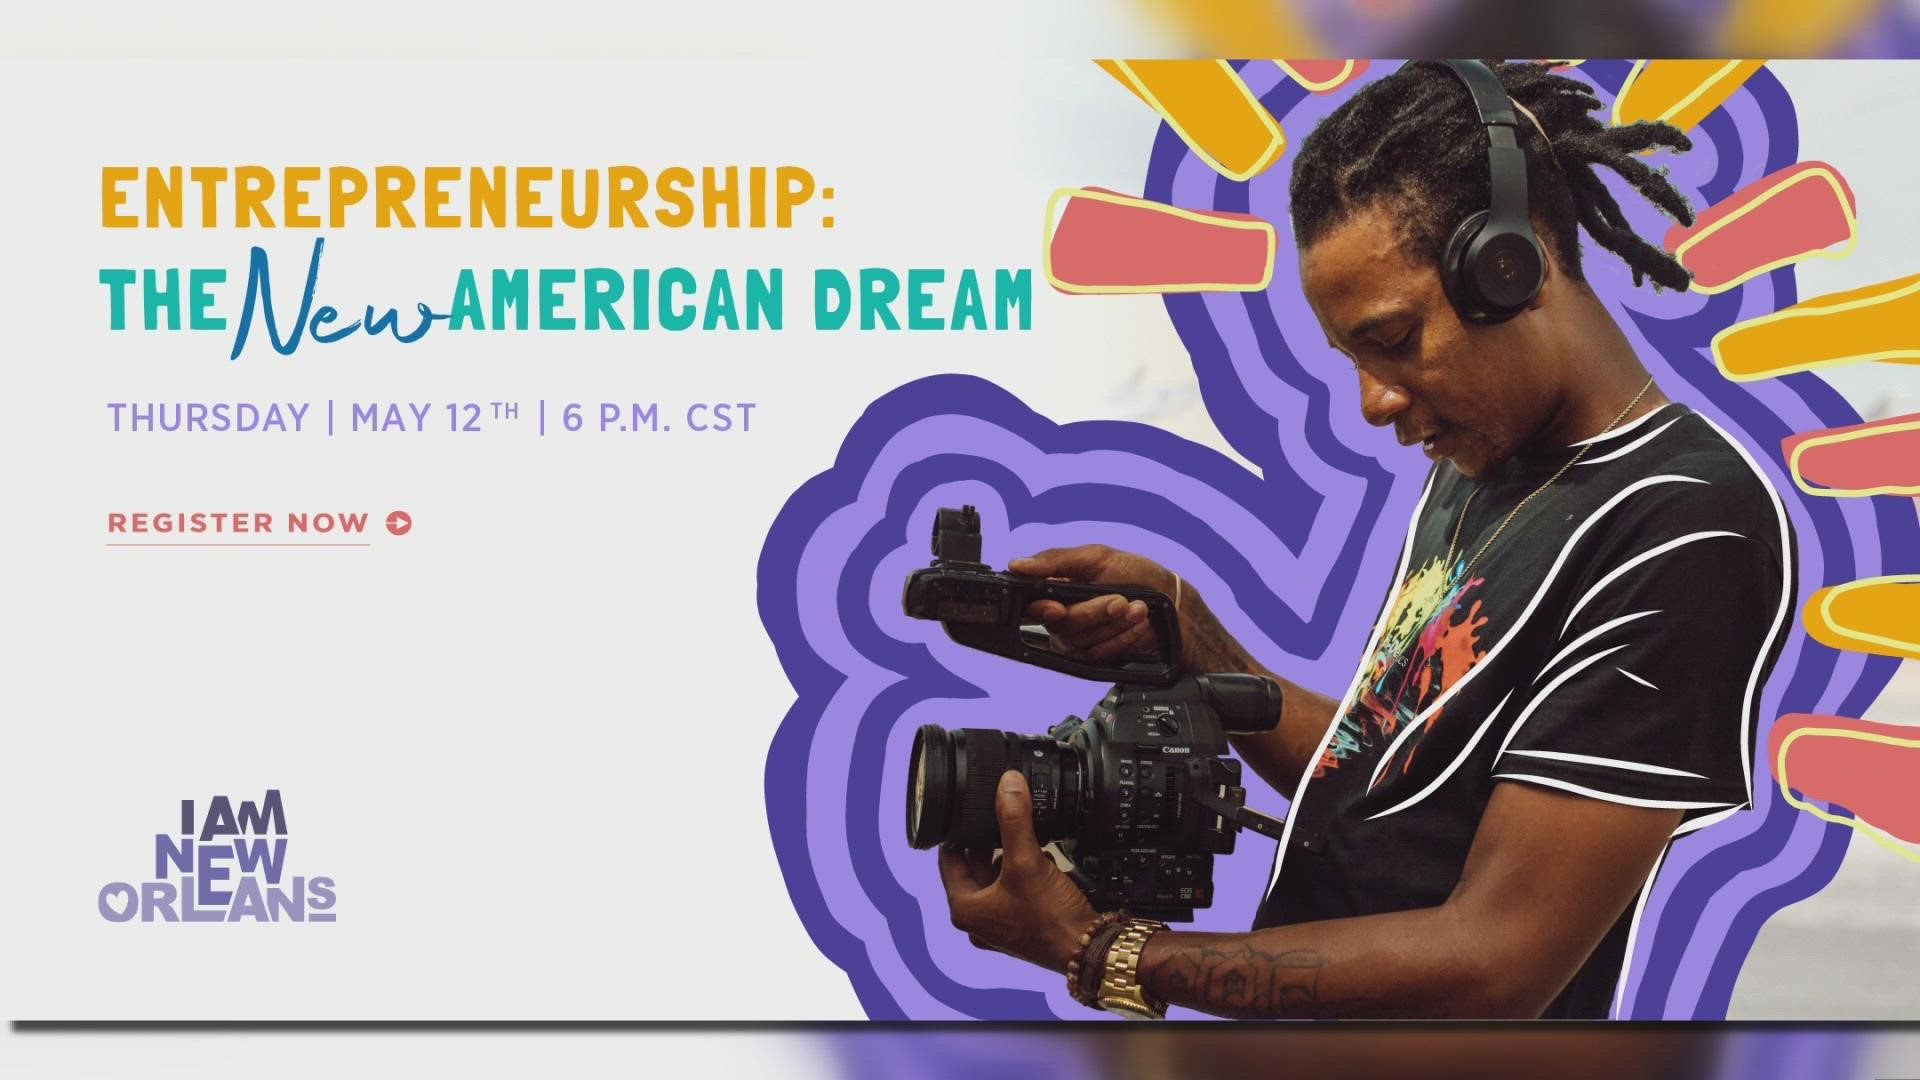 The virtual #IamNewOrleans event addresses how we can use entrepreneurship as a pathway to making individuals and communities economically secure and equitable.